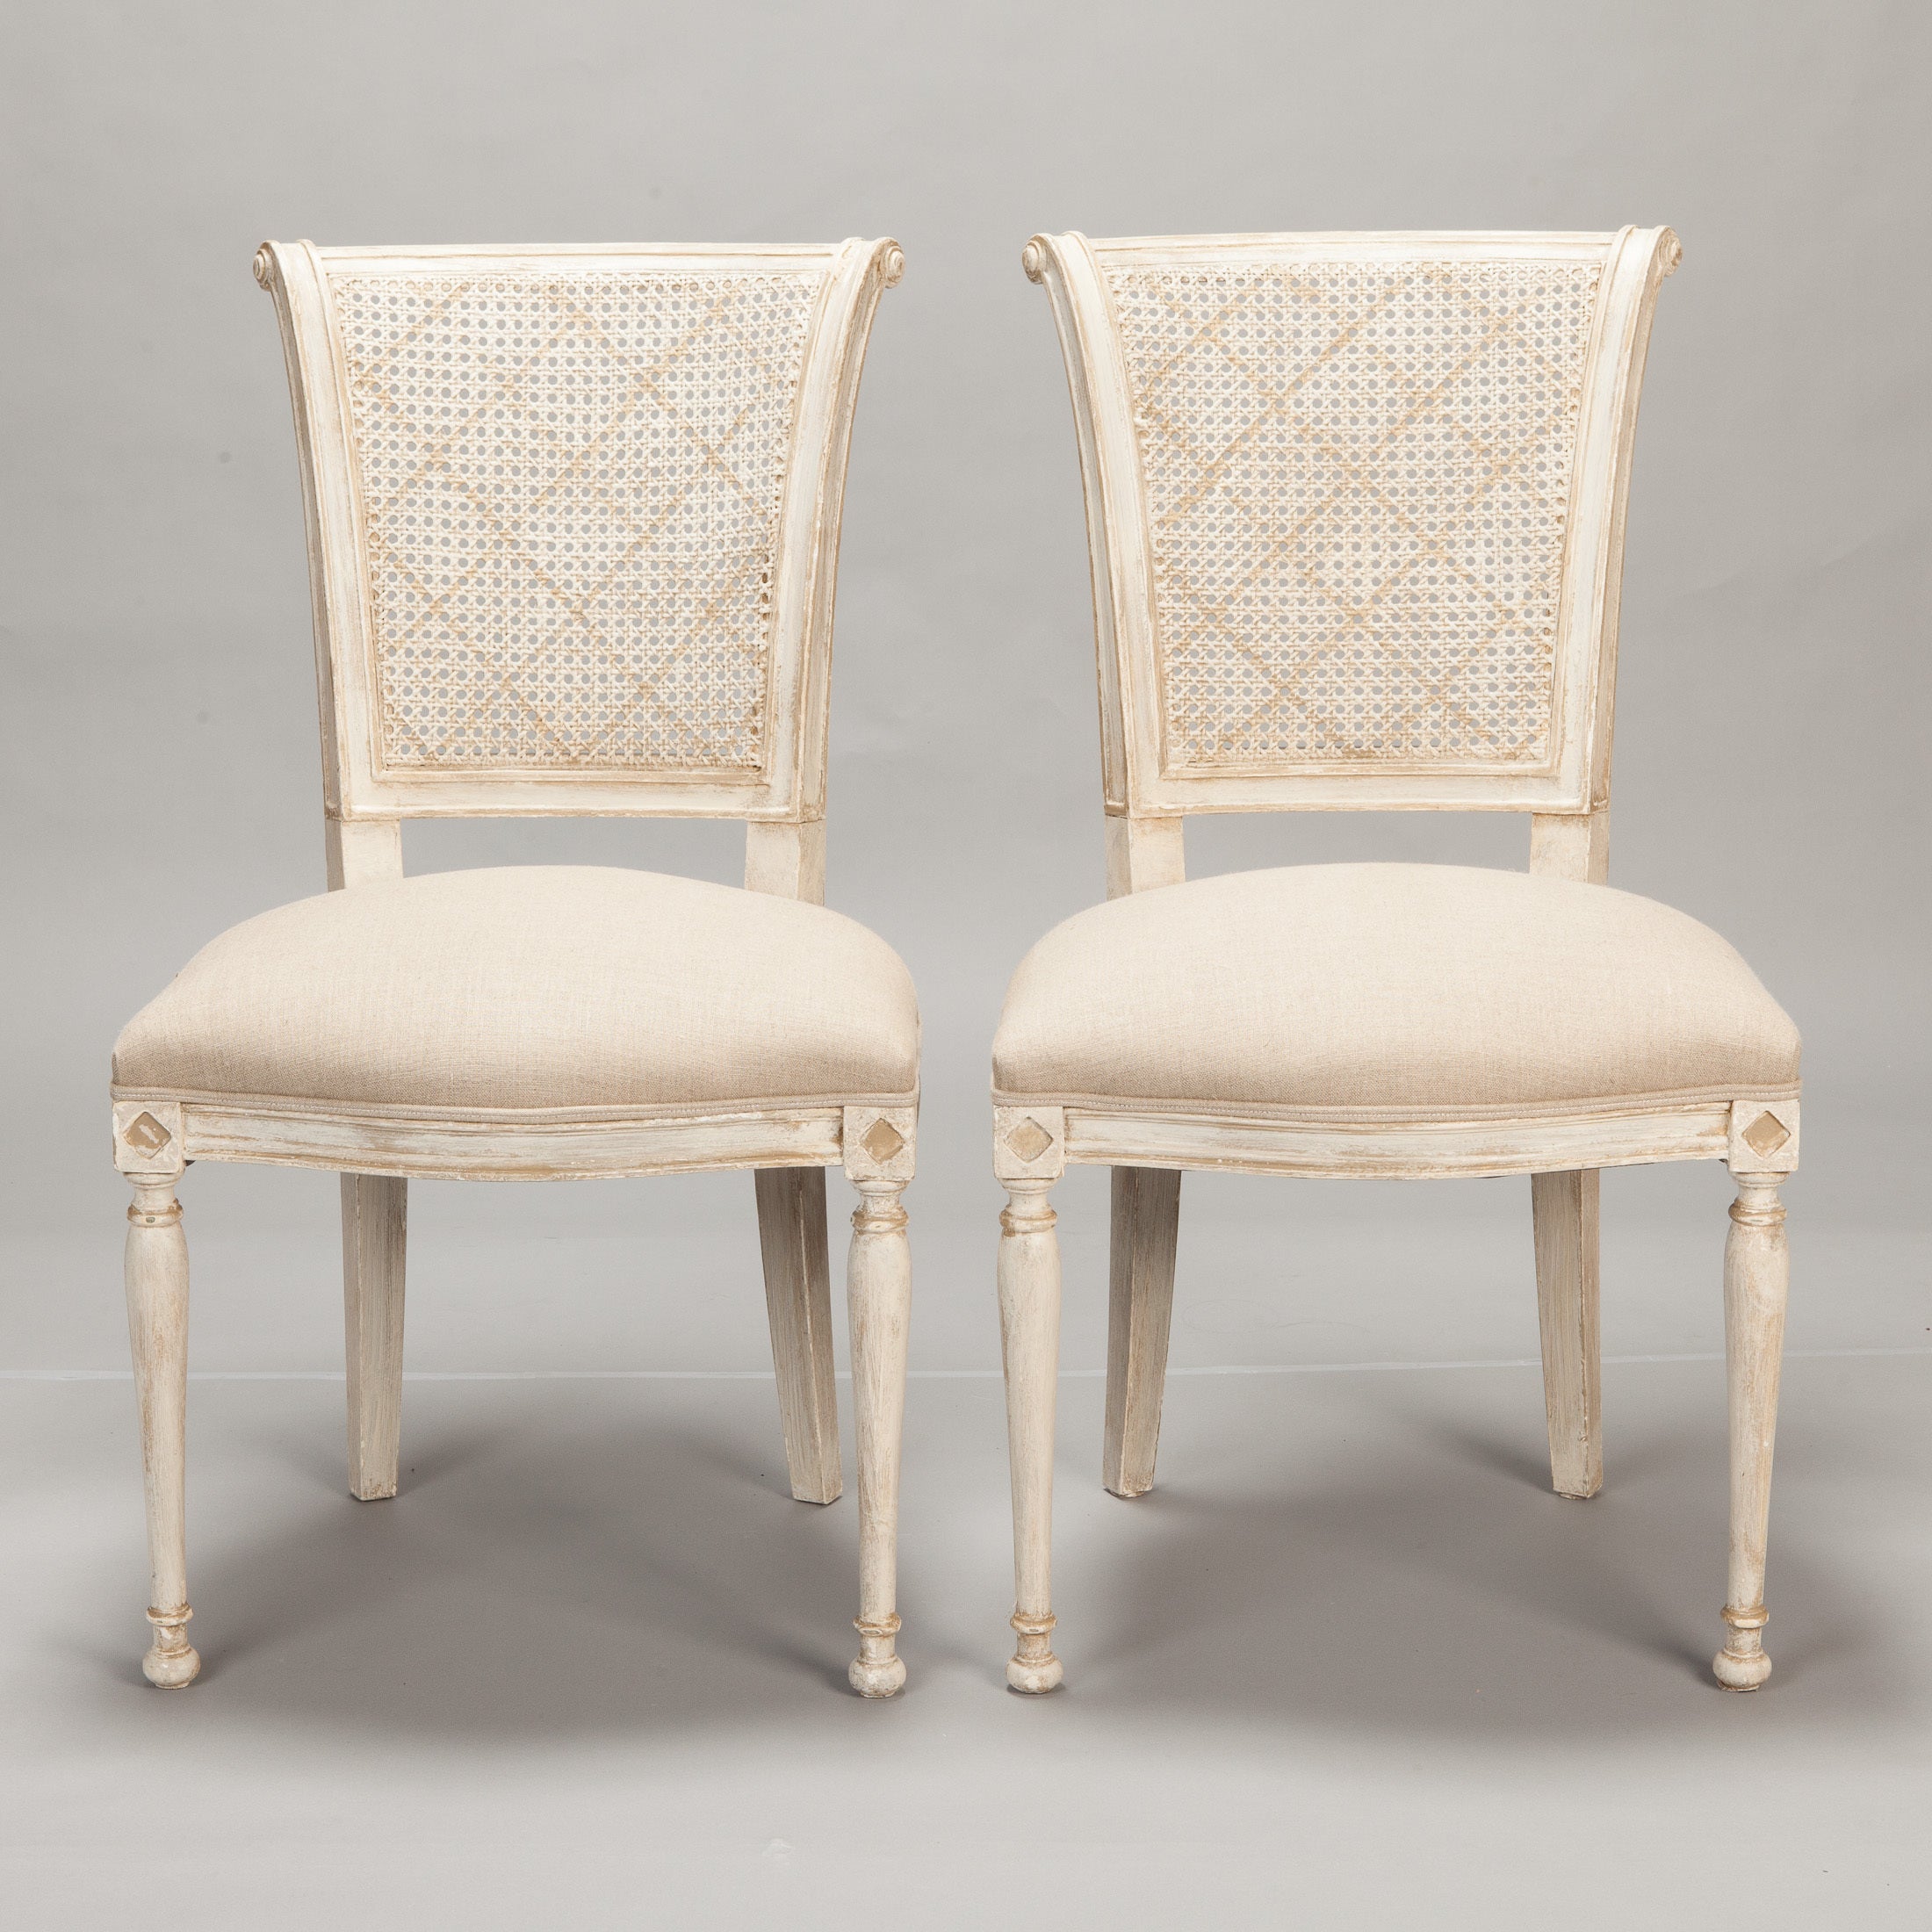 Set of 12 French Cane Back Antique White Dining Chairs